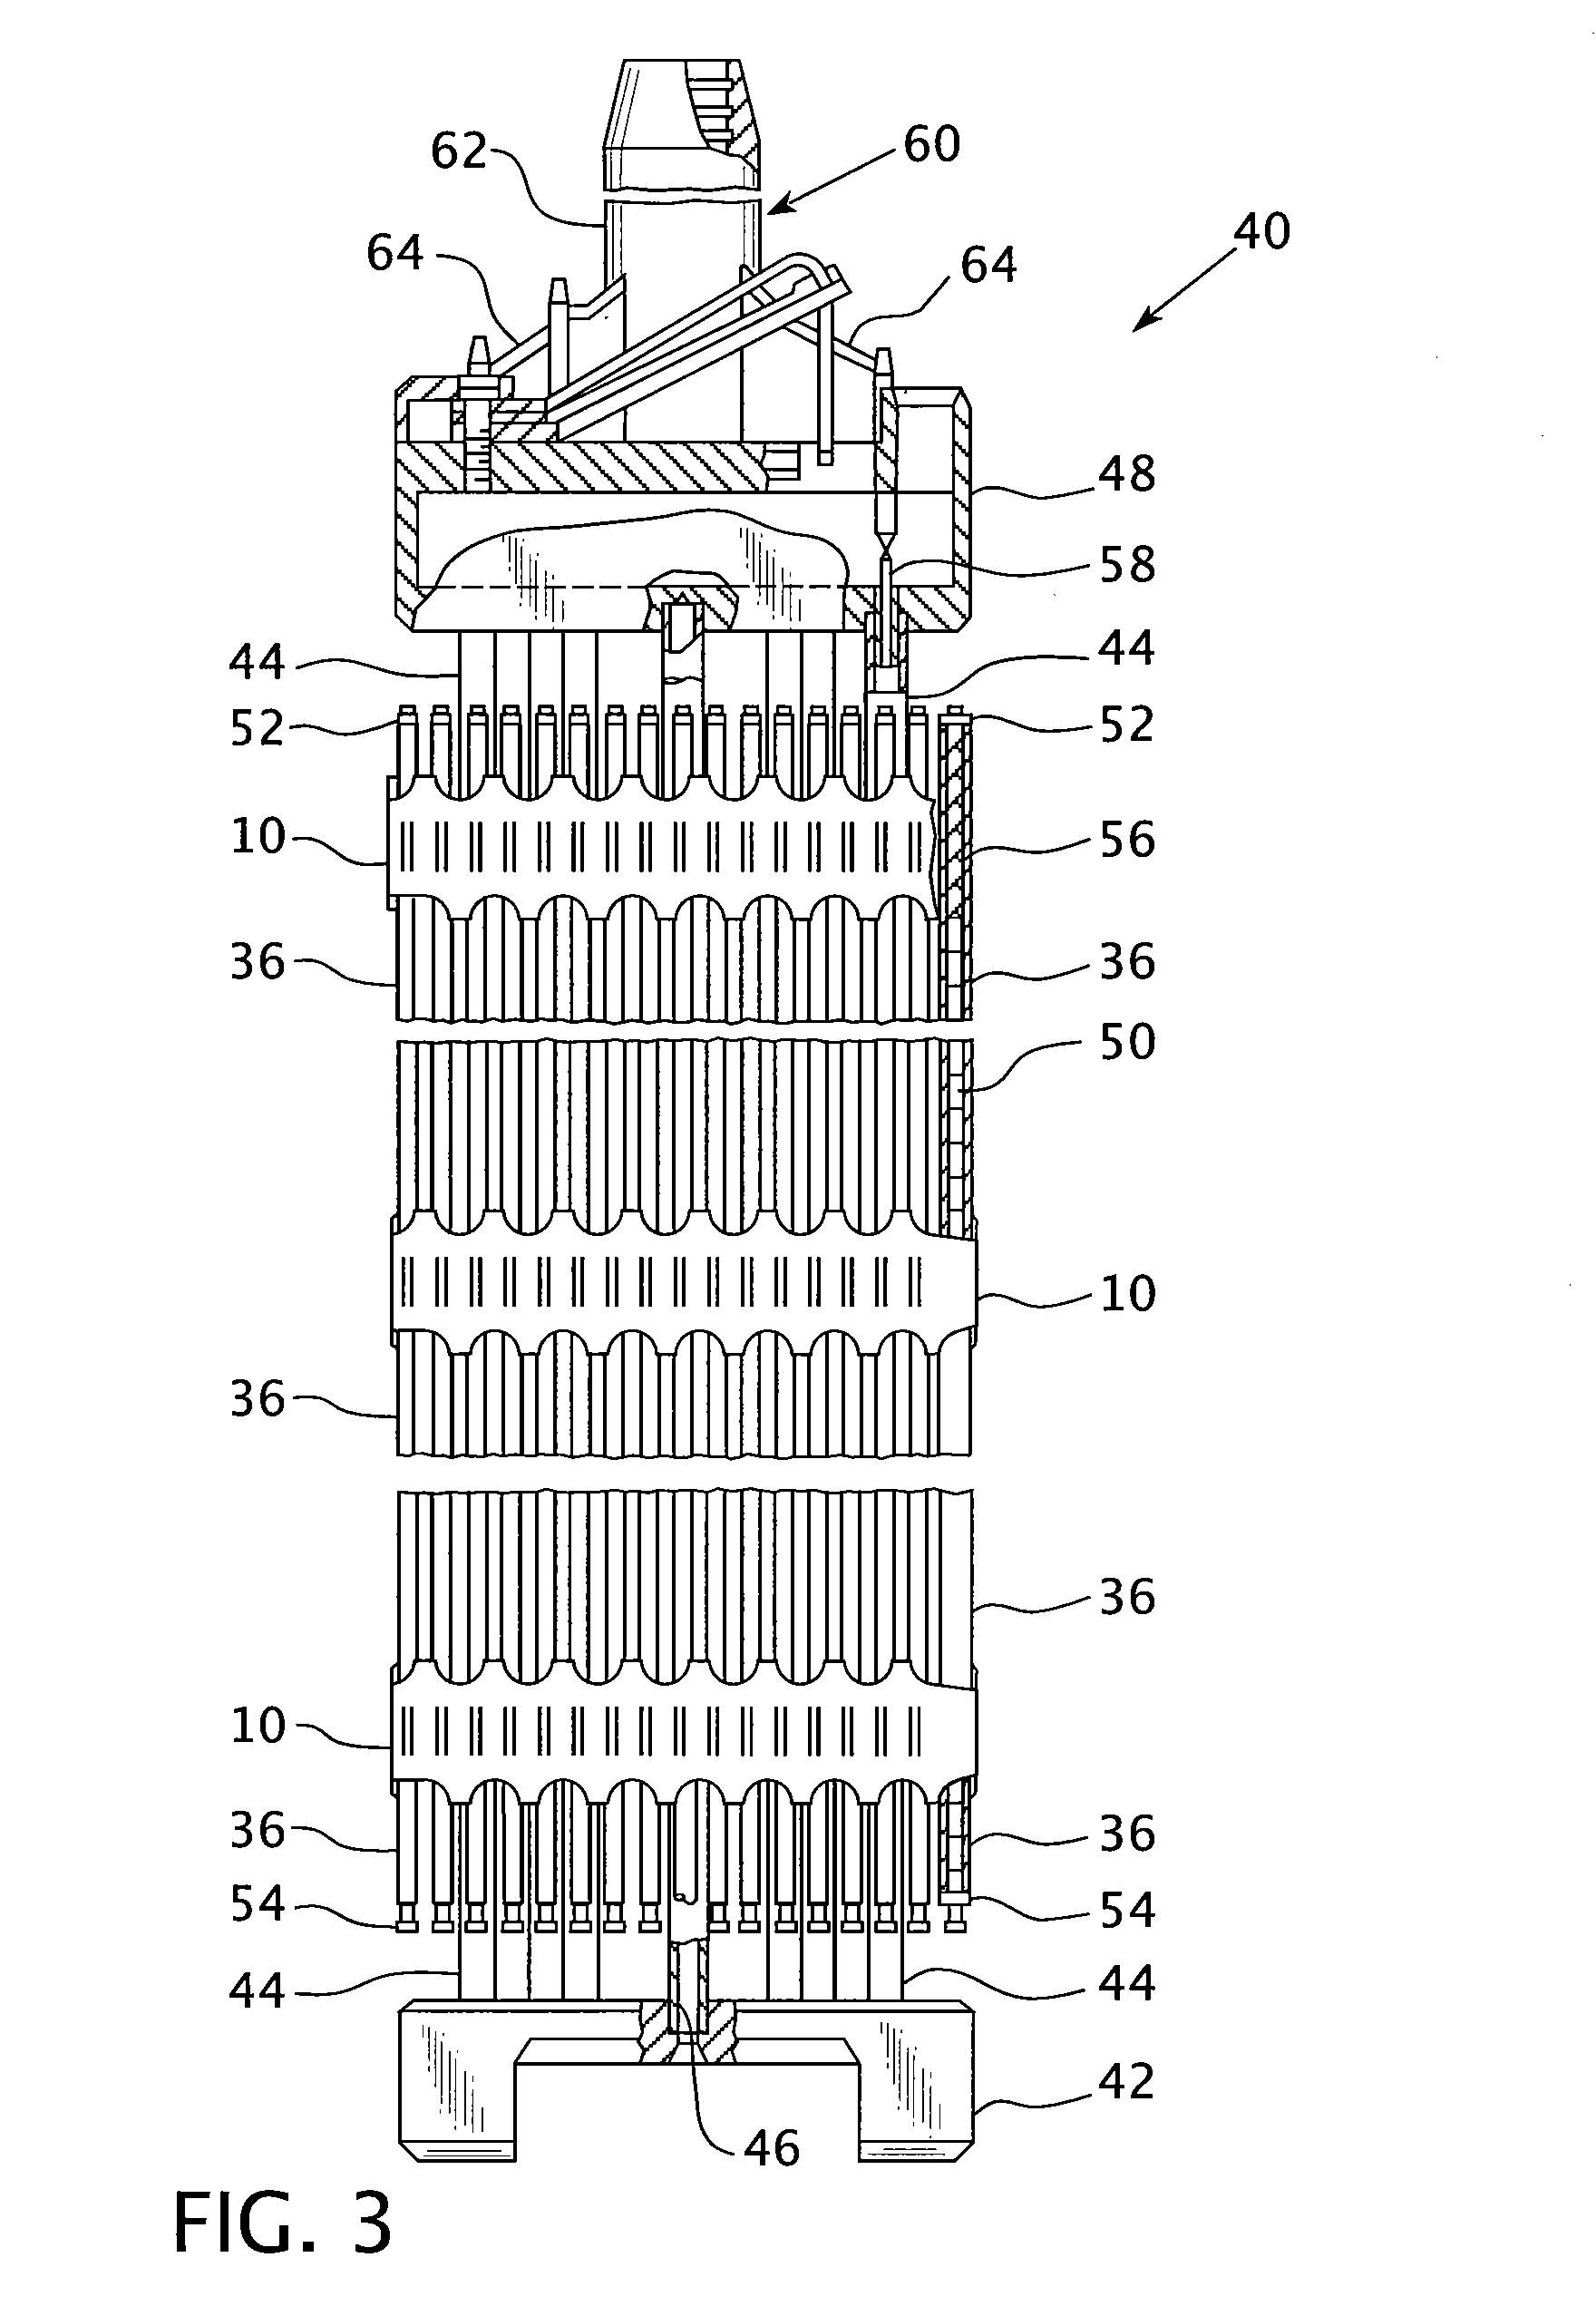 Nuclear fuel assembly with an advanced spacer grid